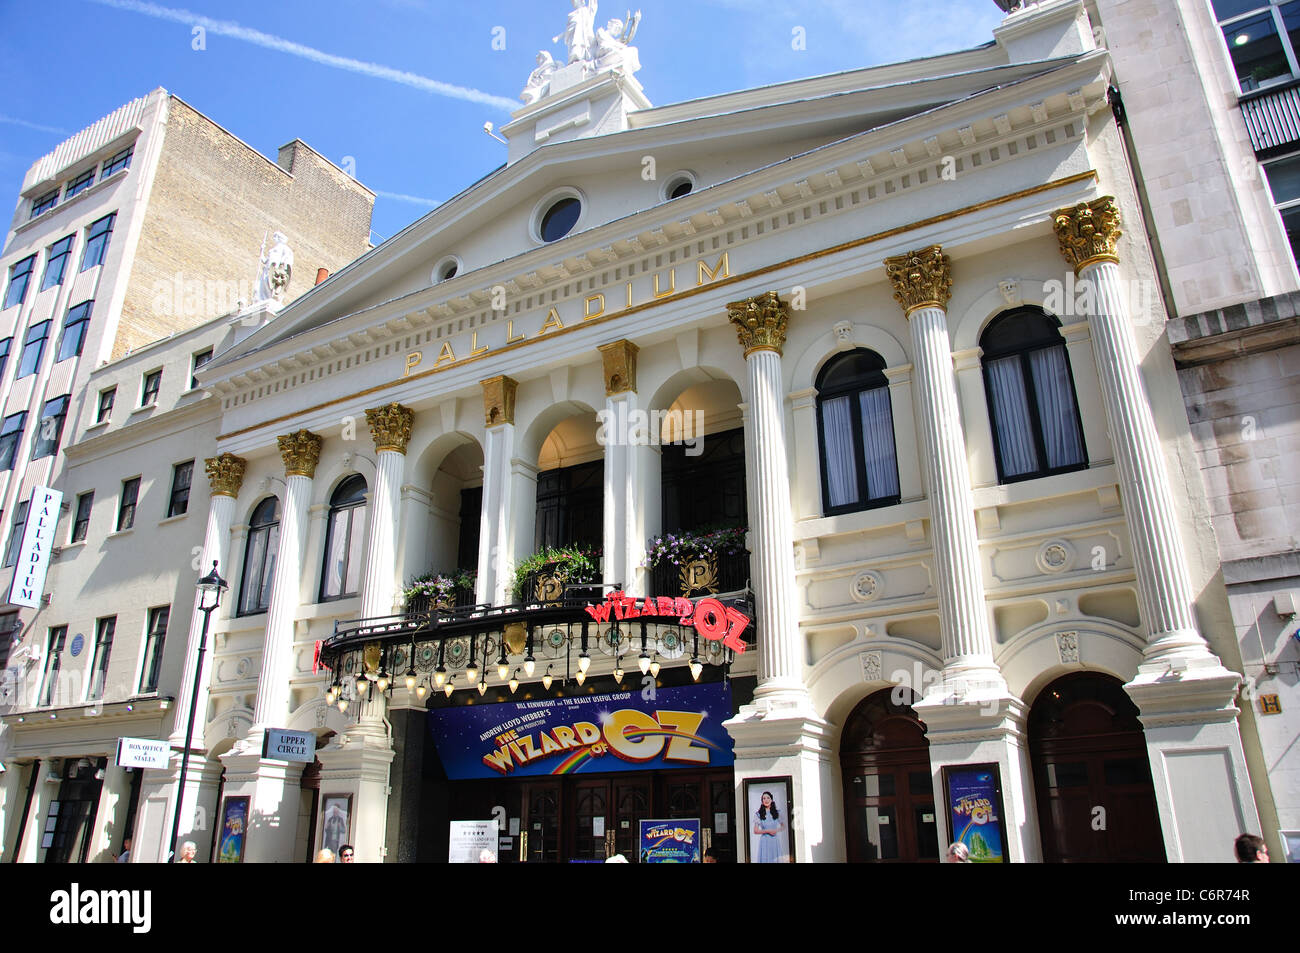 London Palladium Theatre, Argyll Street, Soho, West End, City of Westminster, London, Greater London, Angleterre, Royaume-Uni Banque D'Images